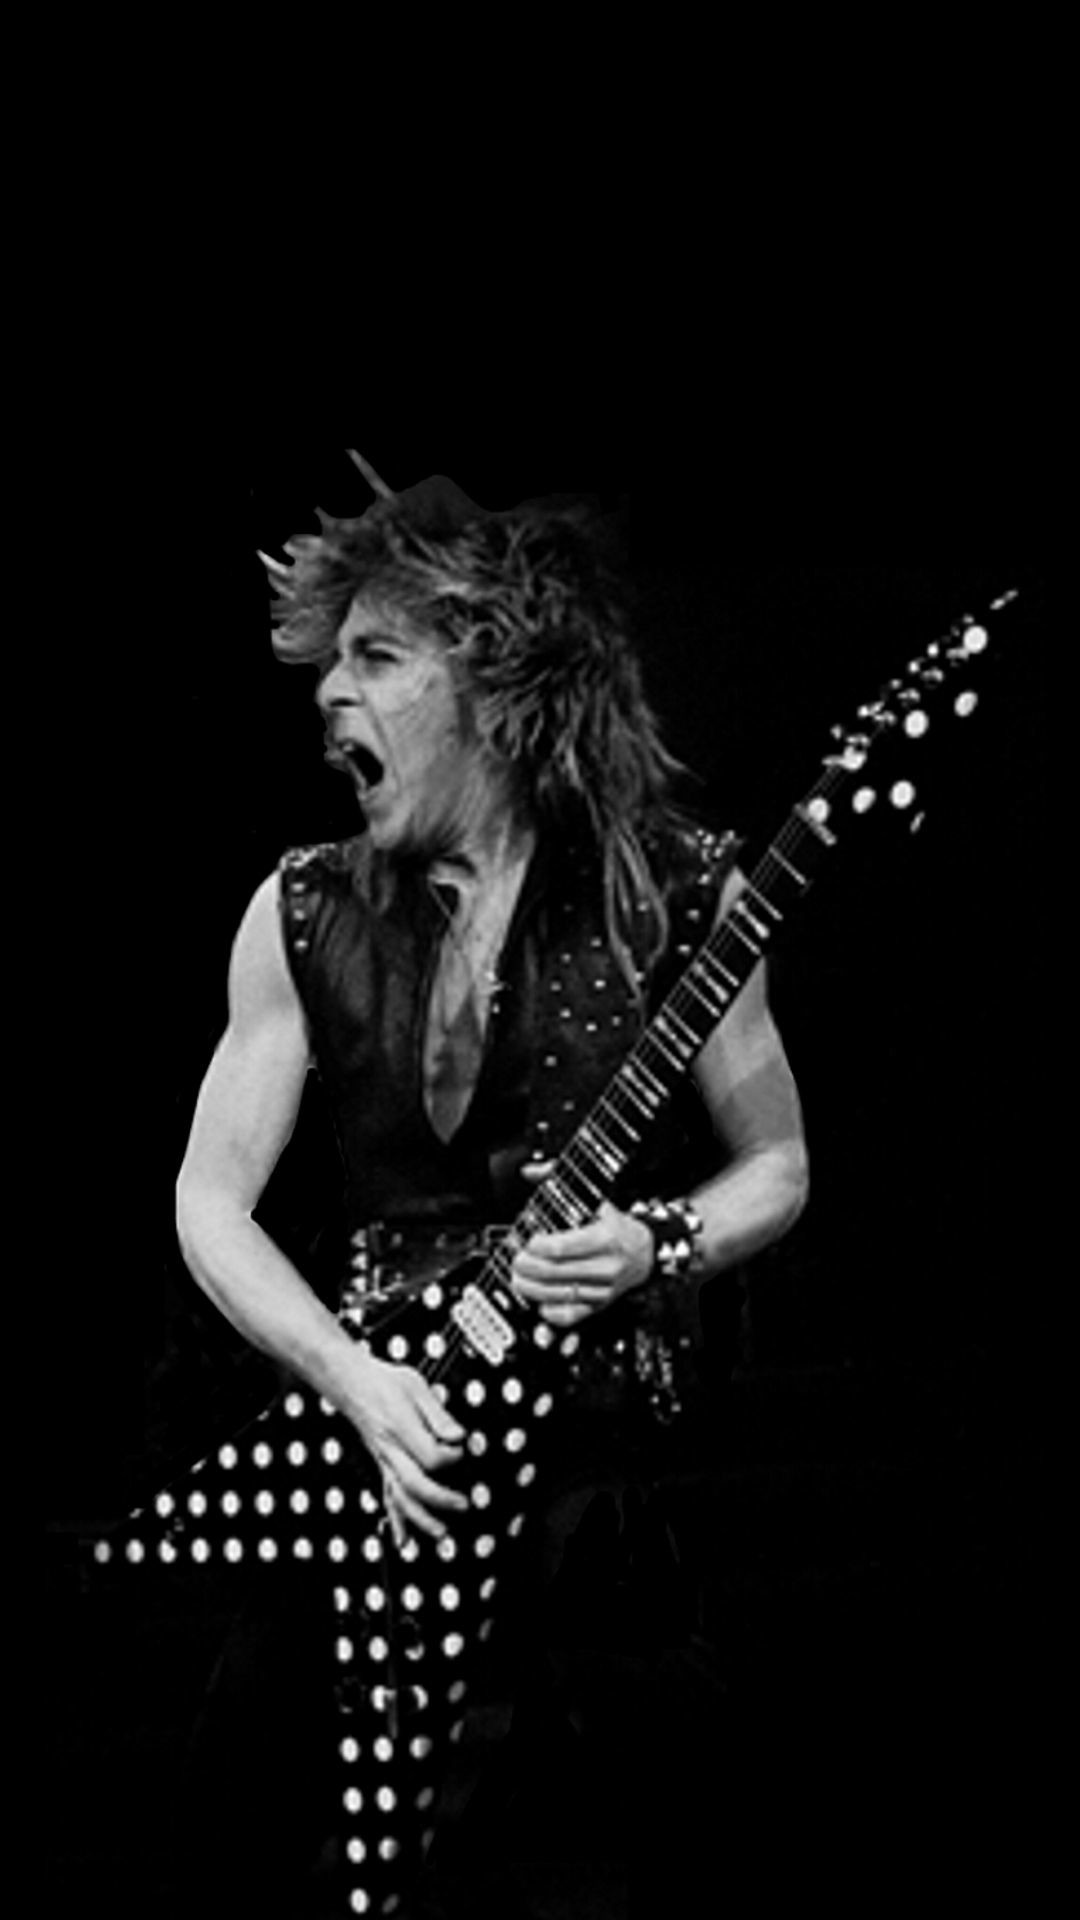 1080x1920 Randy Rhodes we share the same birthday just different years. Cool Wallpaper,  Rhodes,